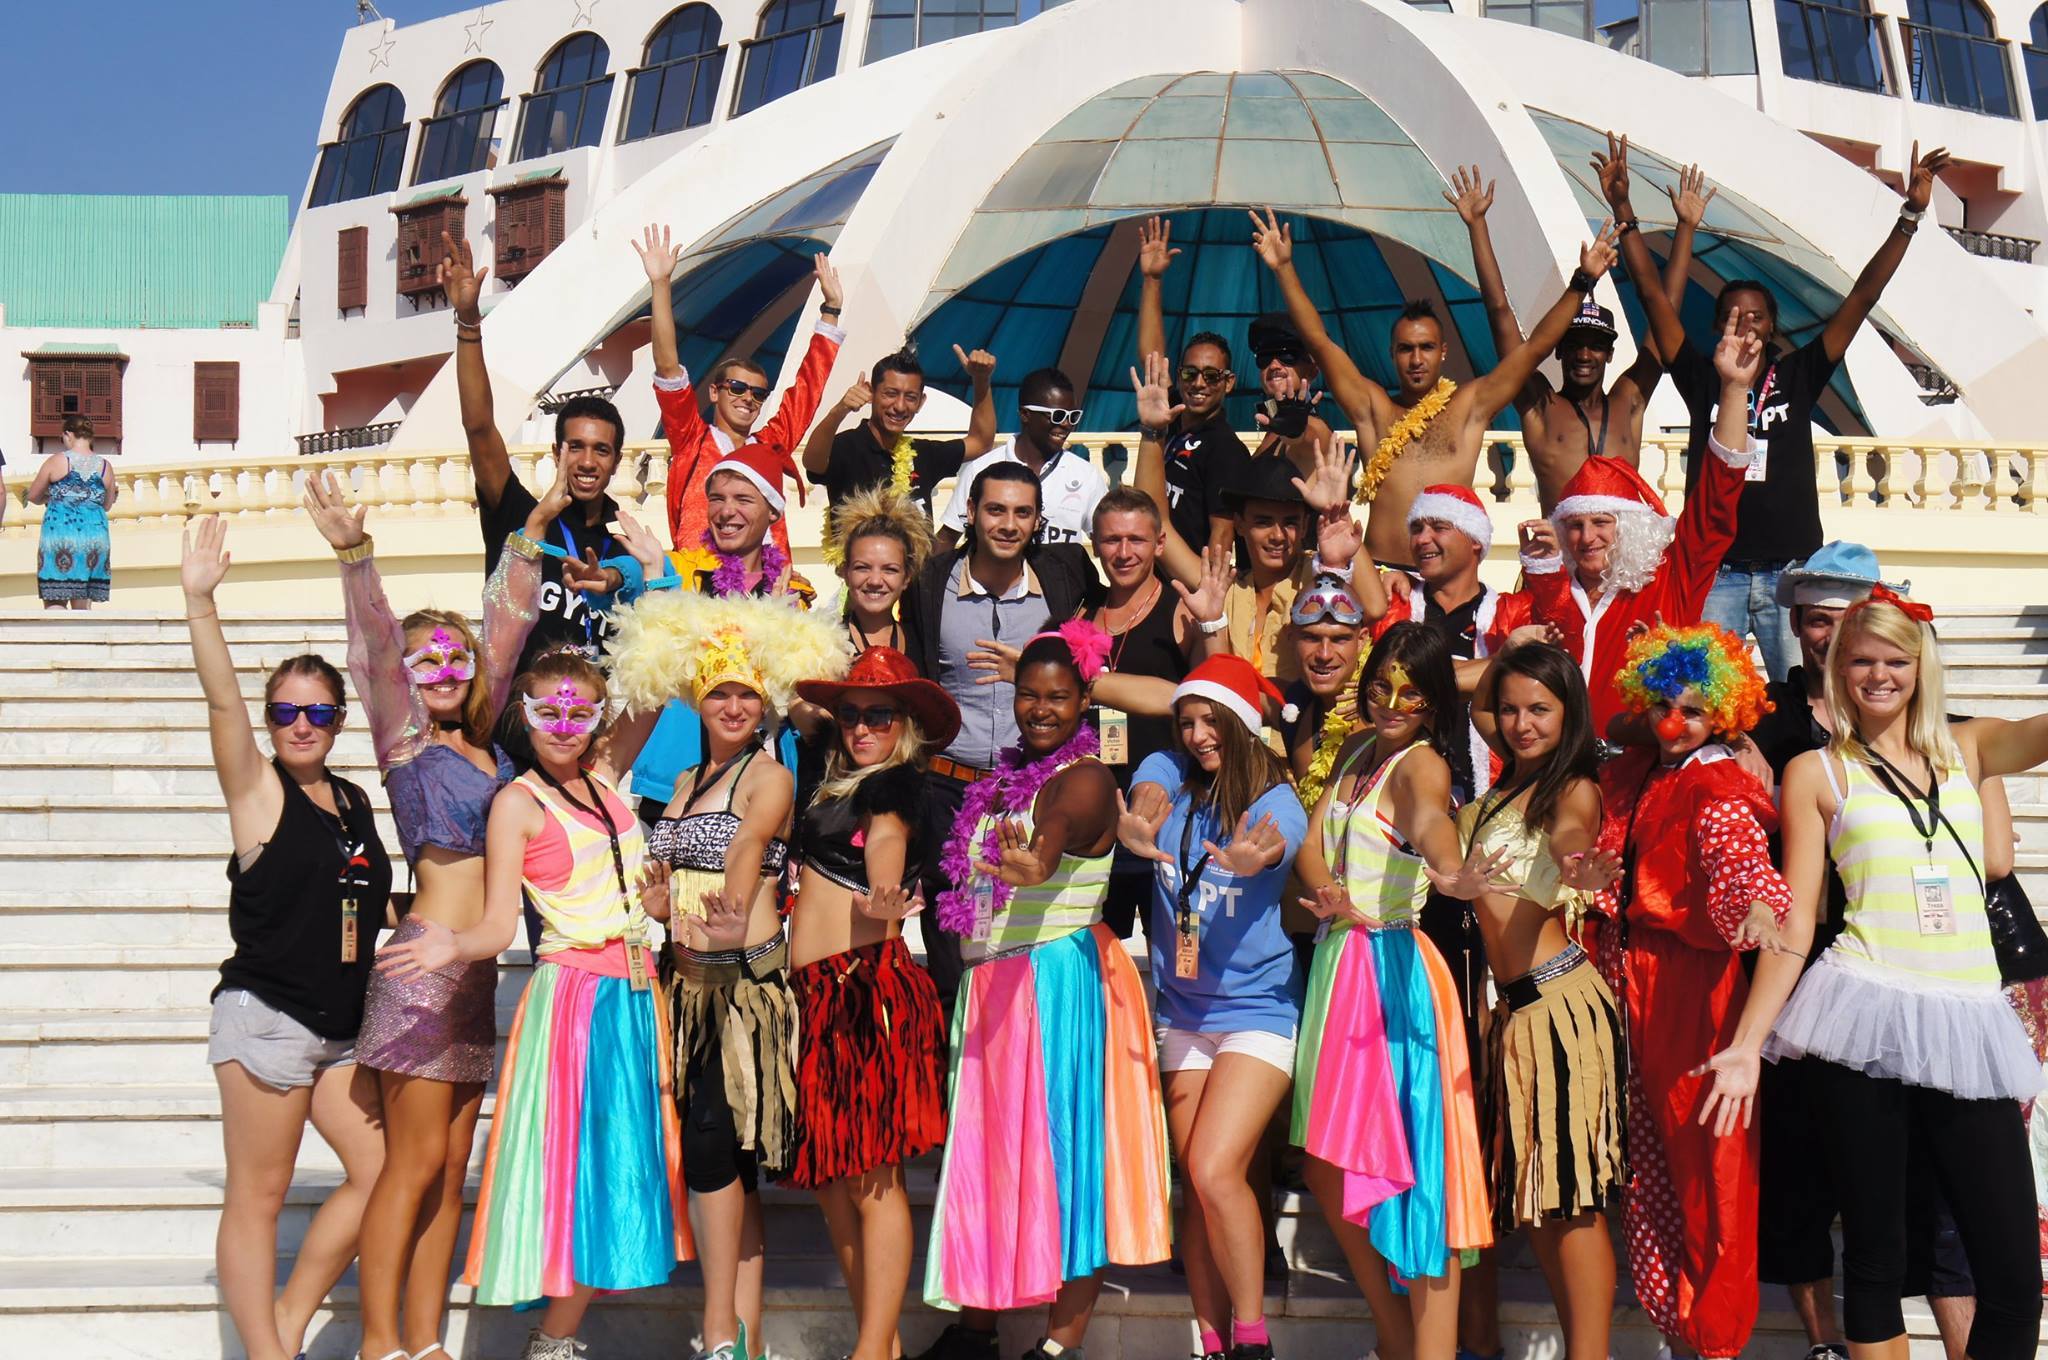 Tourism Industry in Egypt